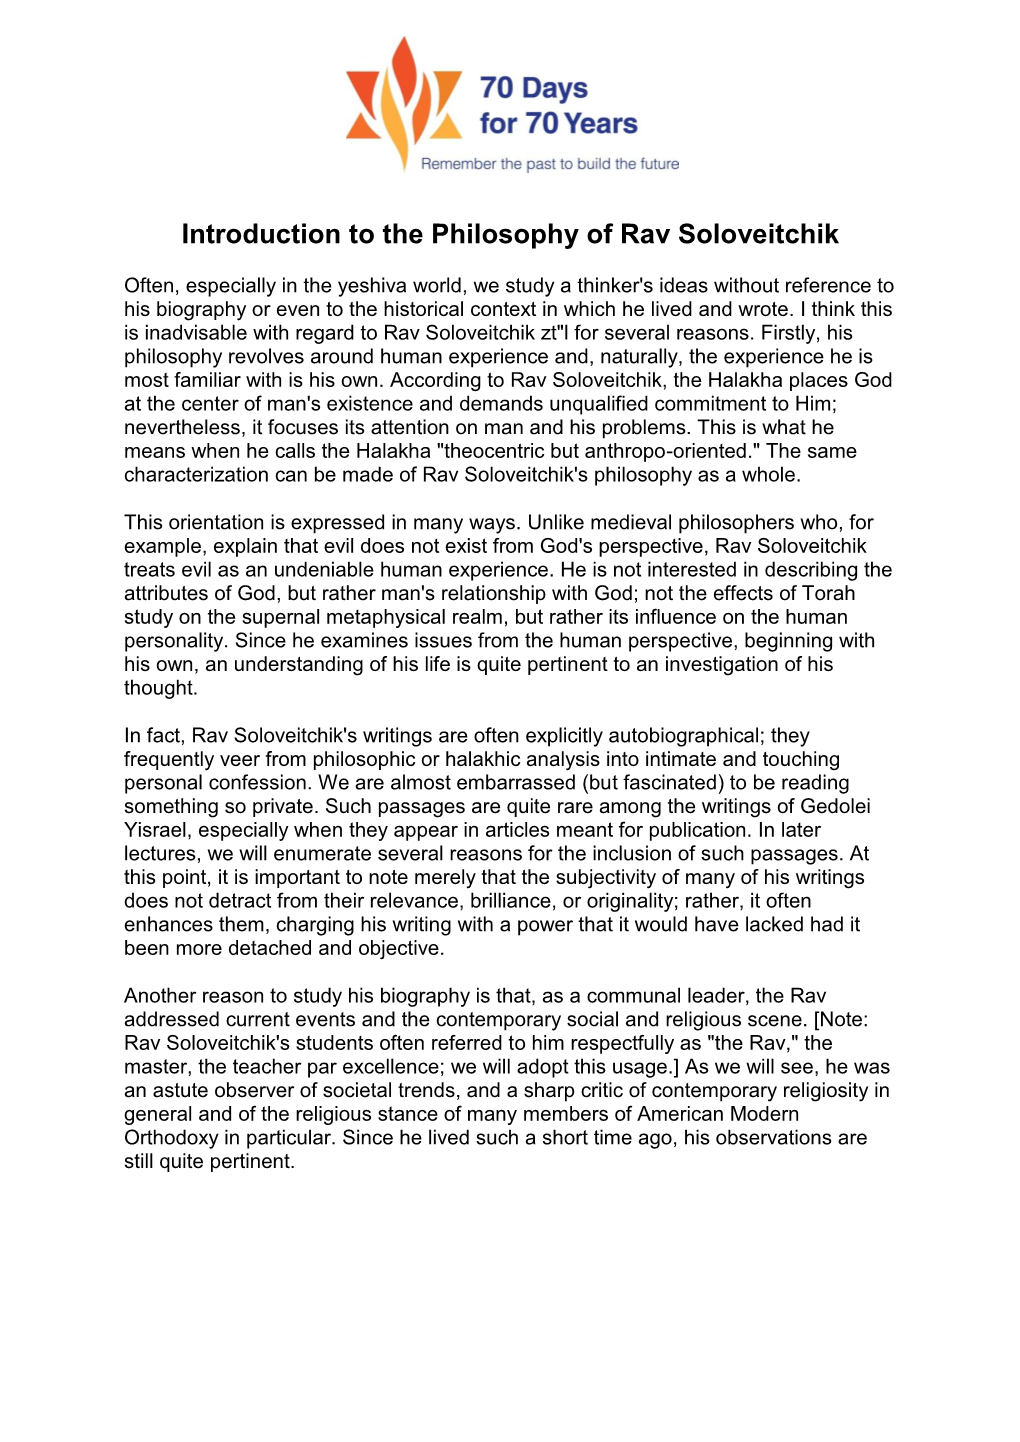 Introduction to the Philosophy of Rav Soloveitchik